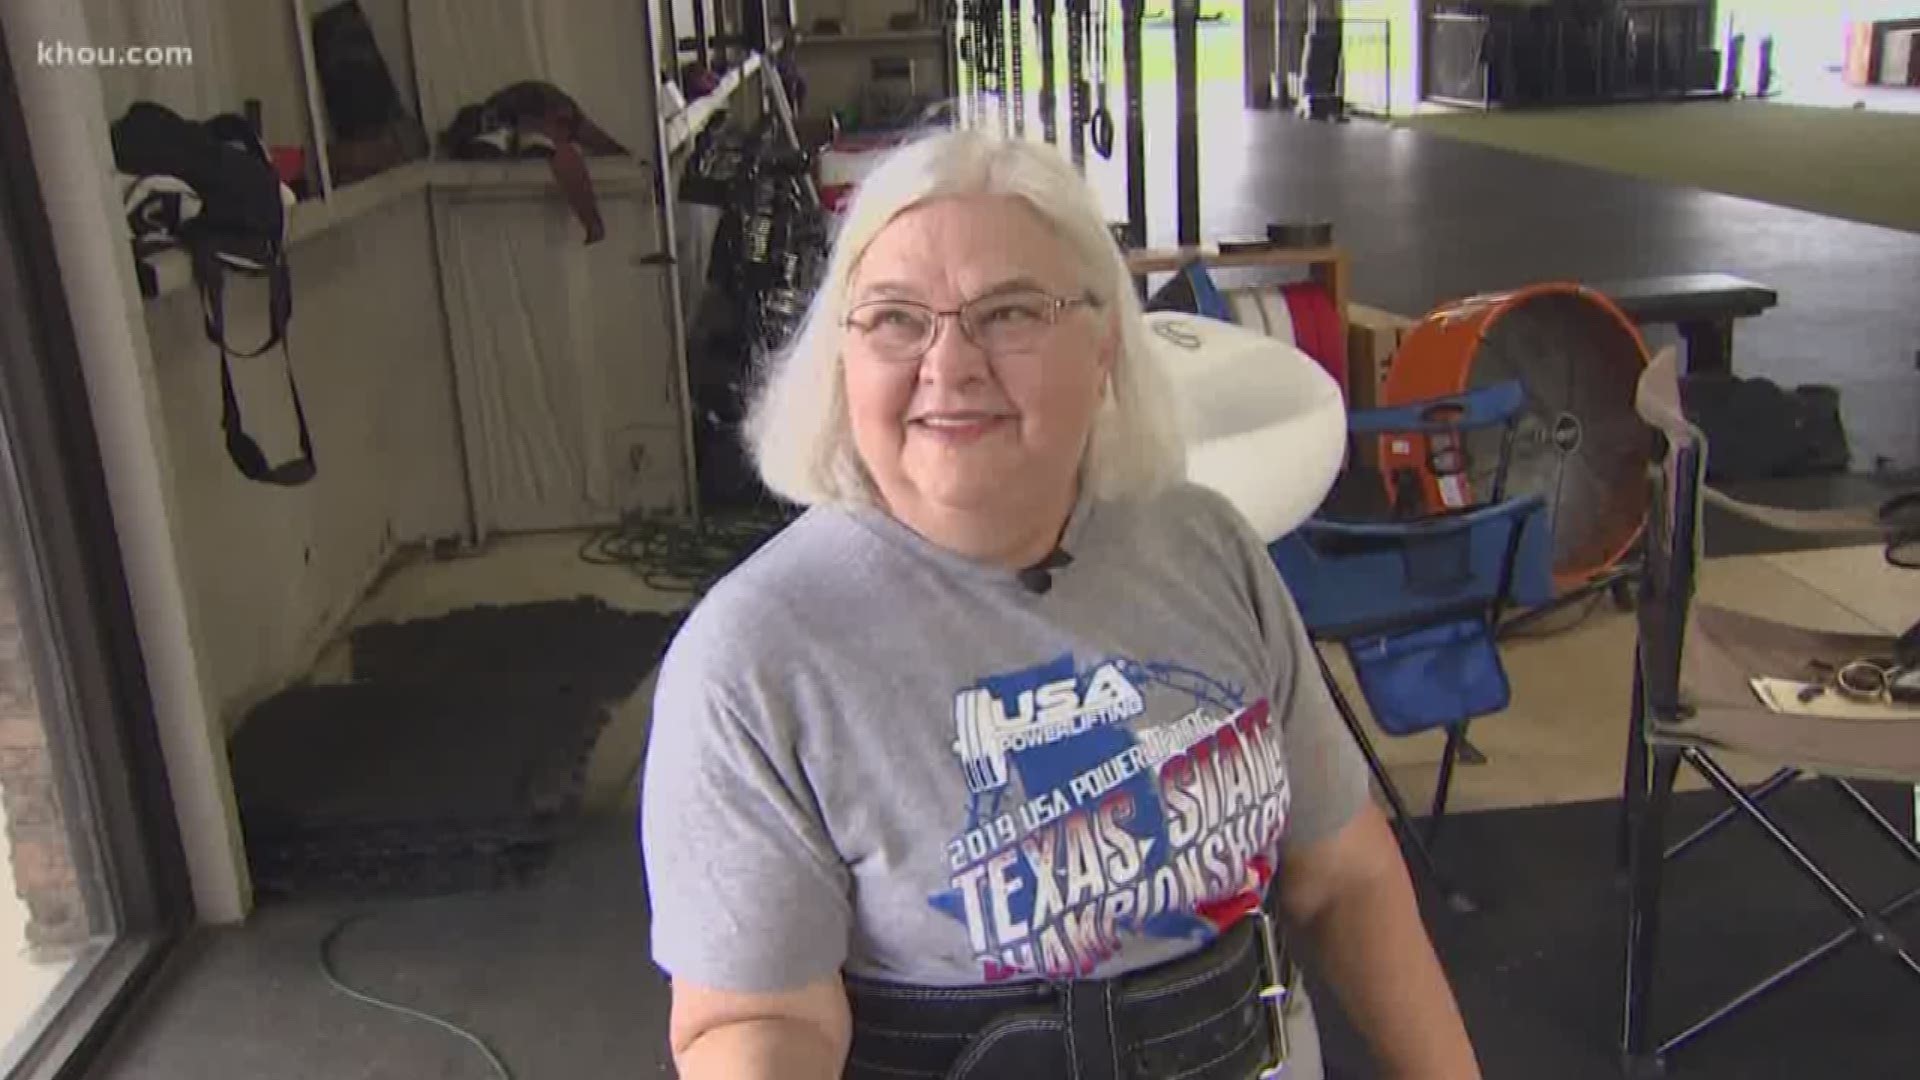 Susan Townsend is making history in the powerlifting world.